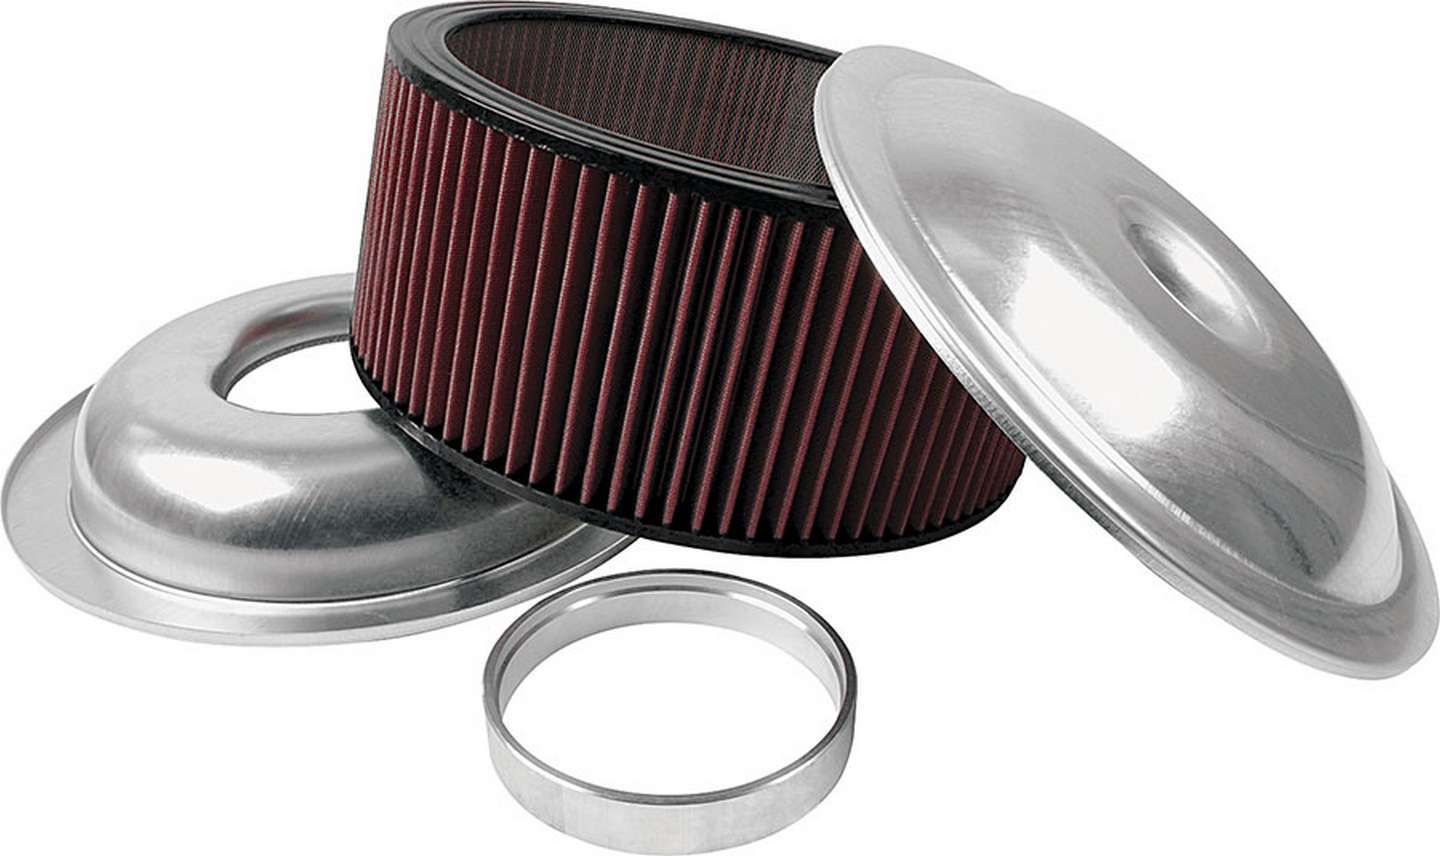 Allstar Performance 25926 Air Cleaner Assembly, Lightweight, 14 in Round, 6 in Element, 5-1/8 in Carb Flange, Drop Base, 1 in Spacer, Aluminum, Natural, Kit